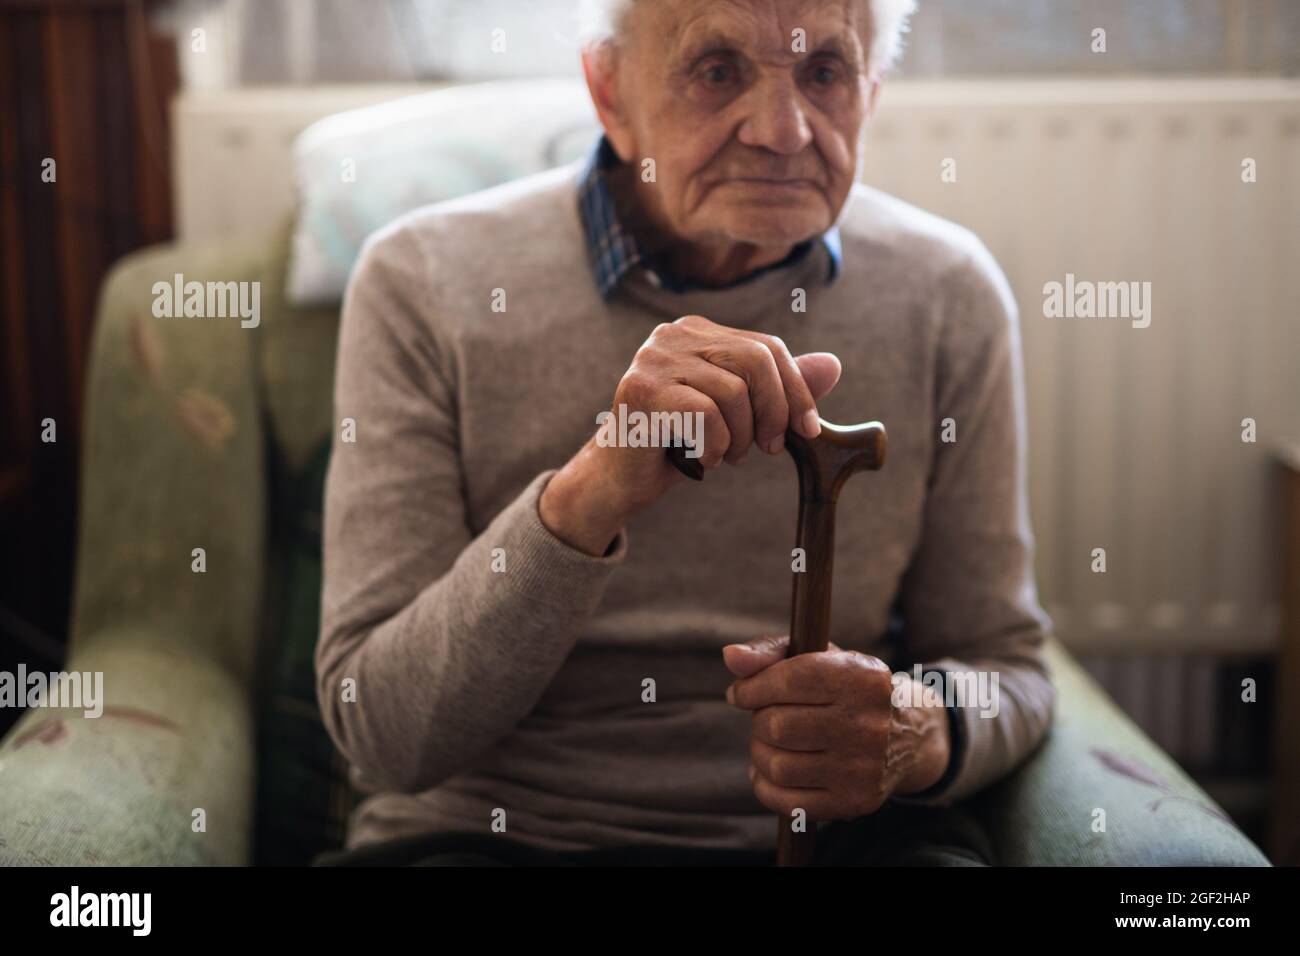 Sad elderly man with walking stick sitting on armchair indoors at home, resting. Stock Photo